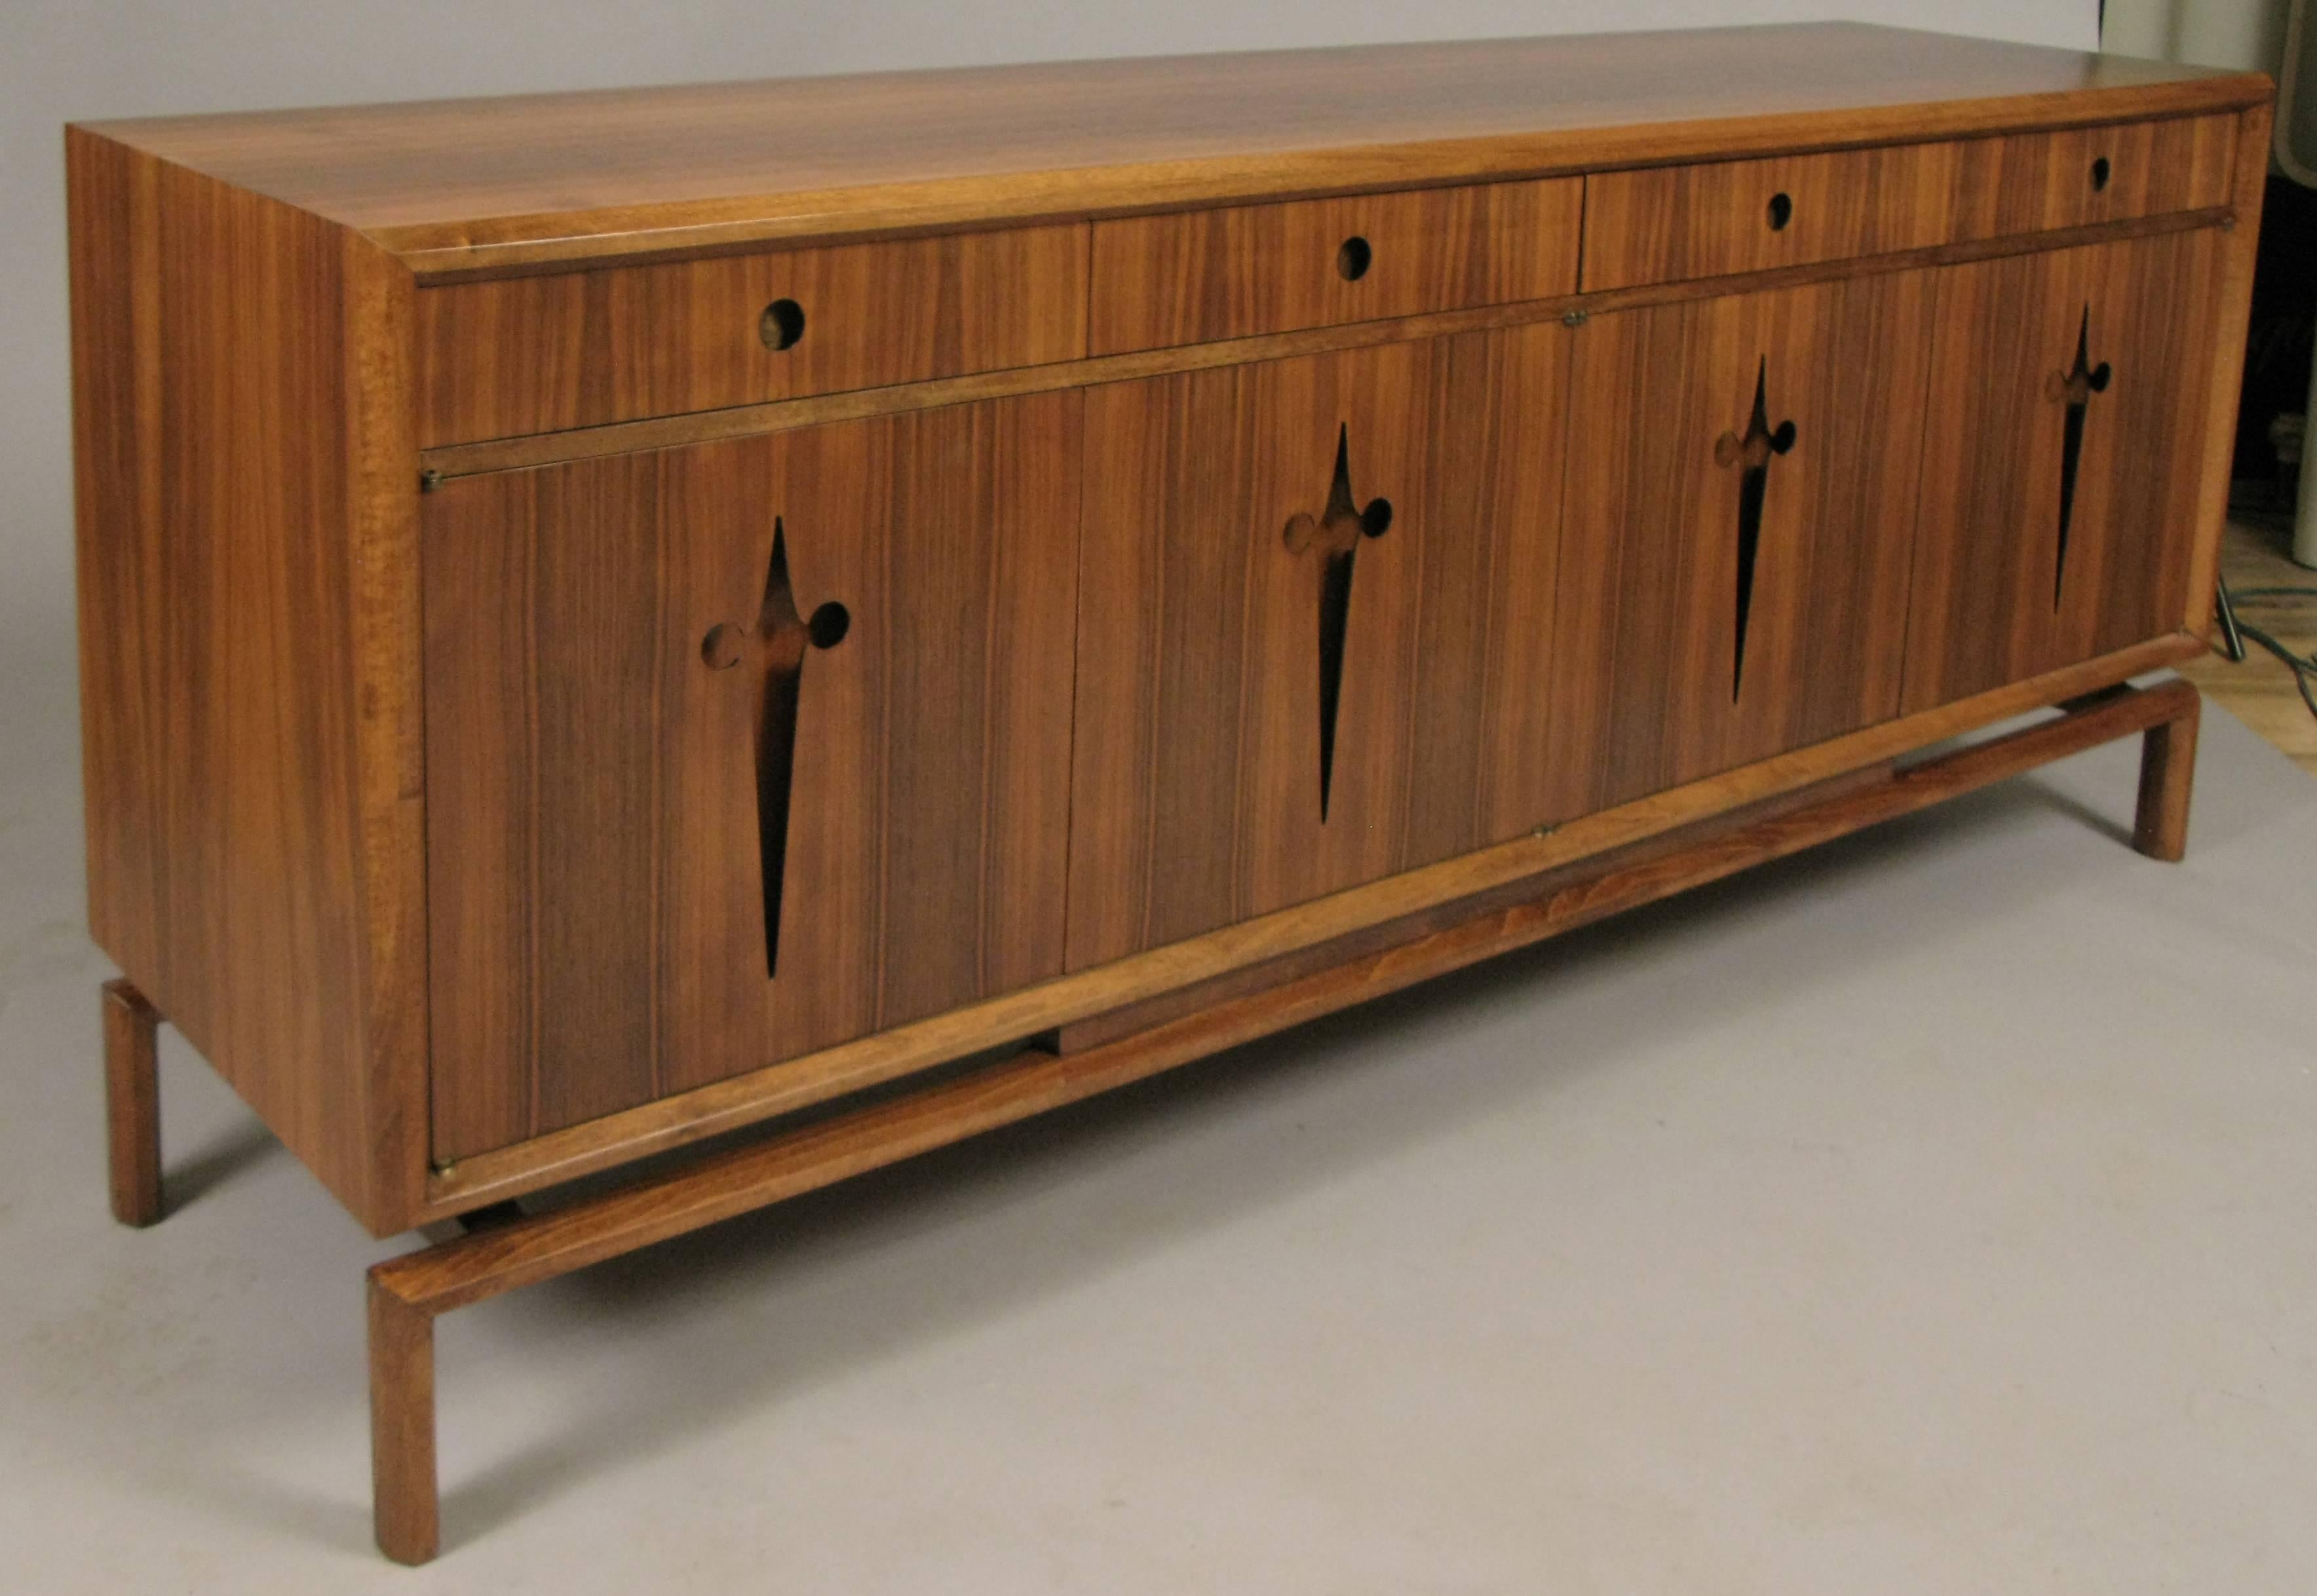 A stunning vintage 1950s walnut credenza made in Sweden and designed by Edmund Spence. Raised on a floating base, with four doors concealing drawers and shelves, and four drawers across the top. The integrated handles are recessed and the lower ones